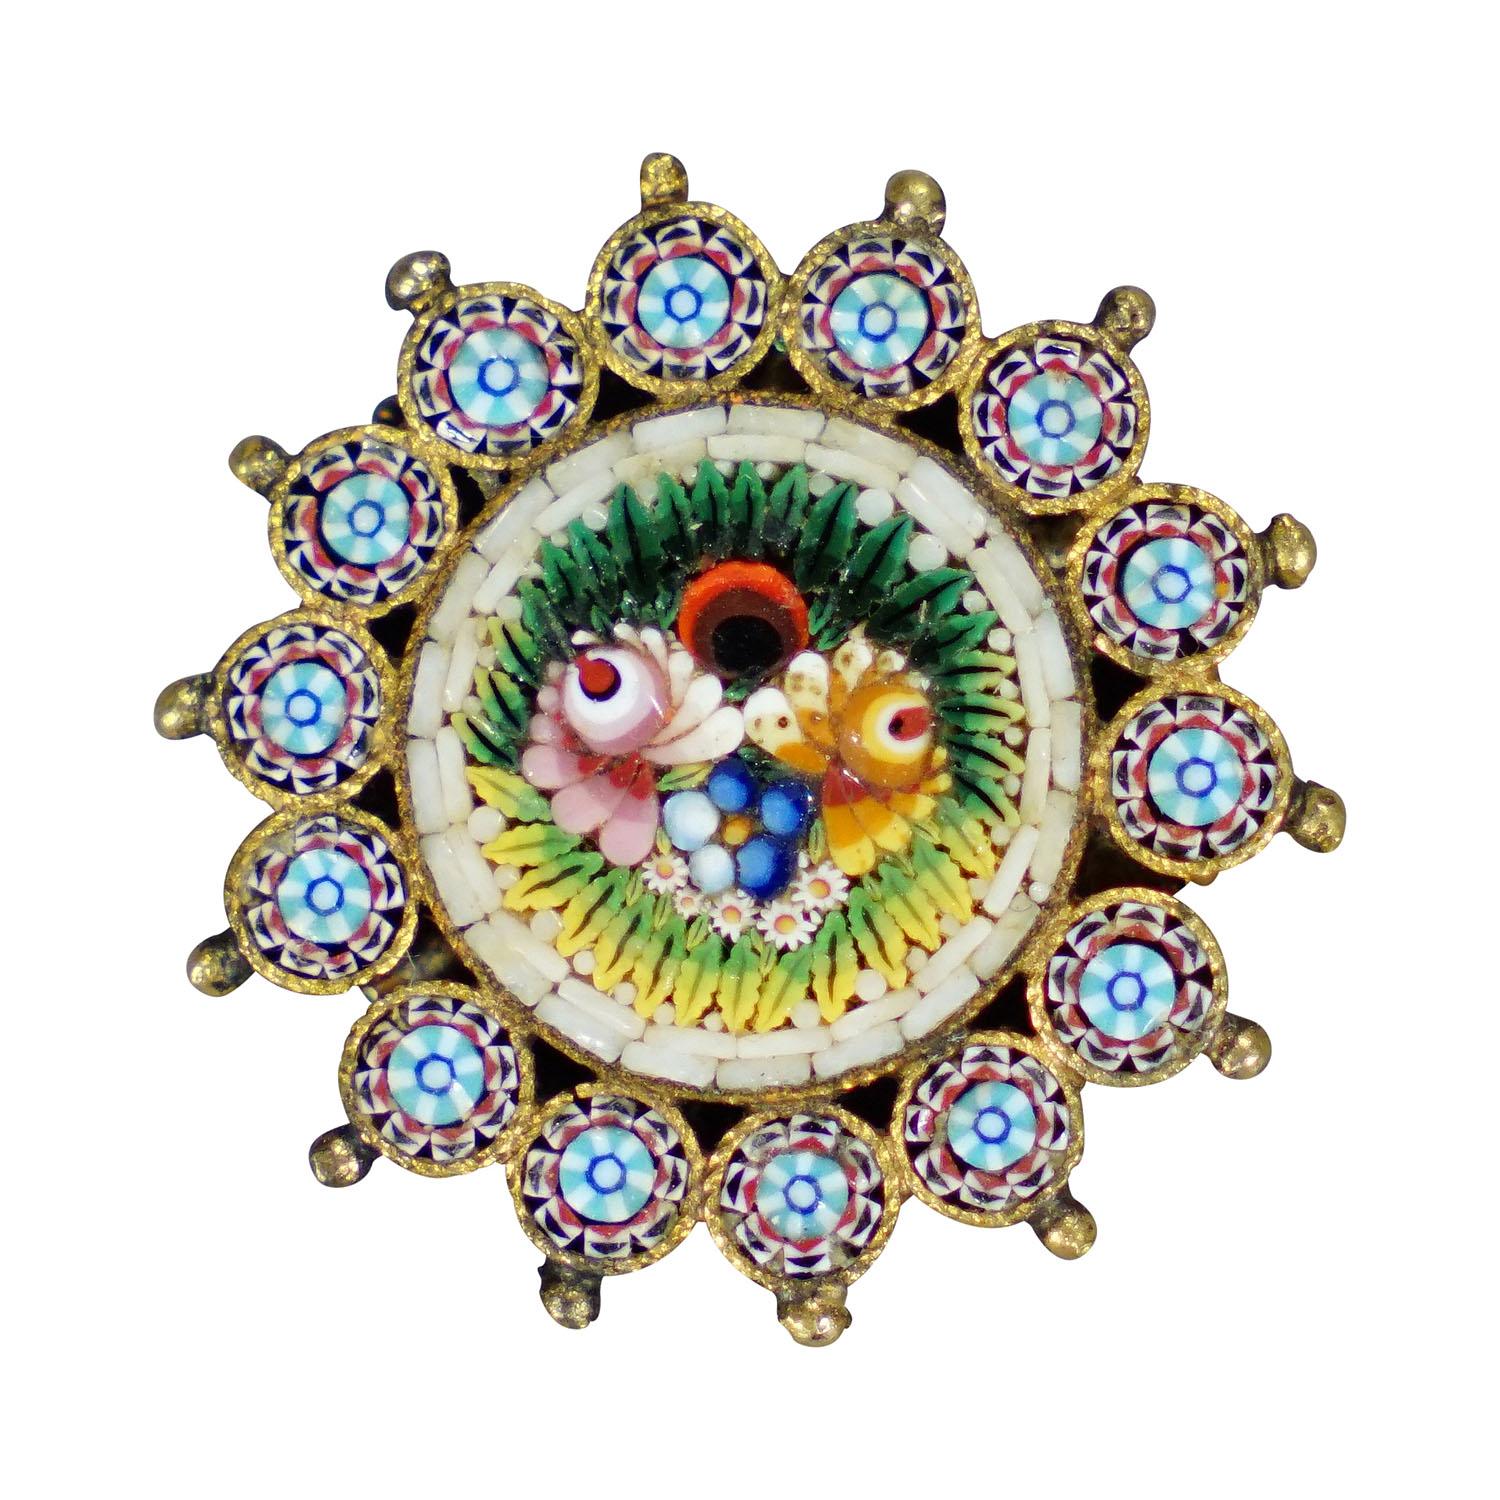 Antique Victorian Micromosaic gilded brooch, Italy early 20th century

A Victorian micromosaic brooch with a central floral bouquet motif surrounded by a ring of small concentric mosaics and gilded beading. Manufacturted in Venice, Italy early 20th